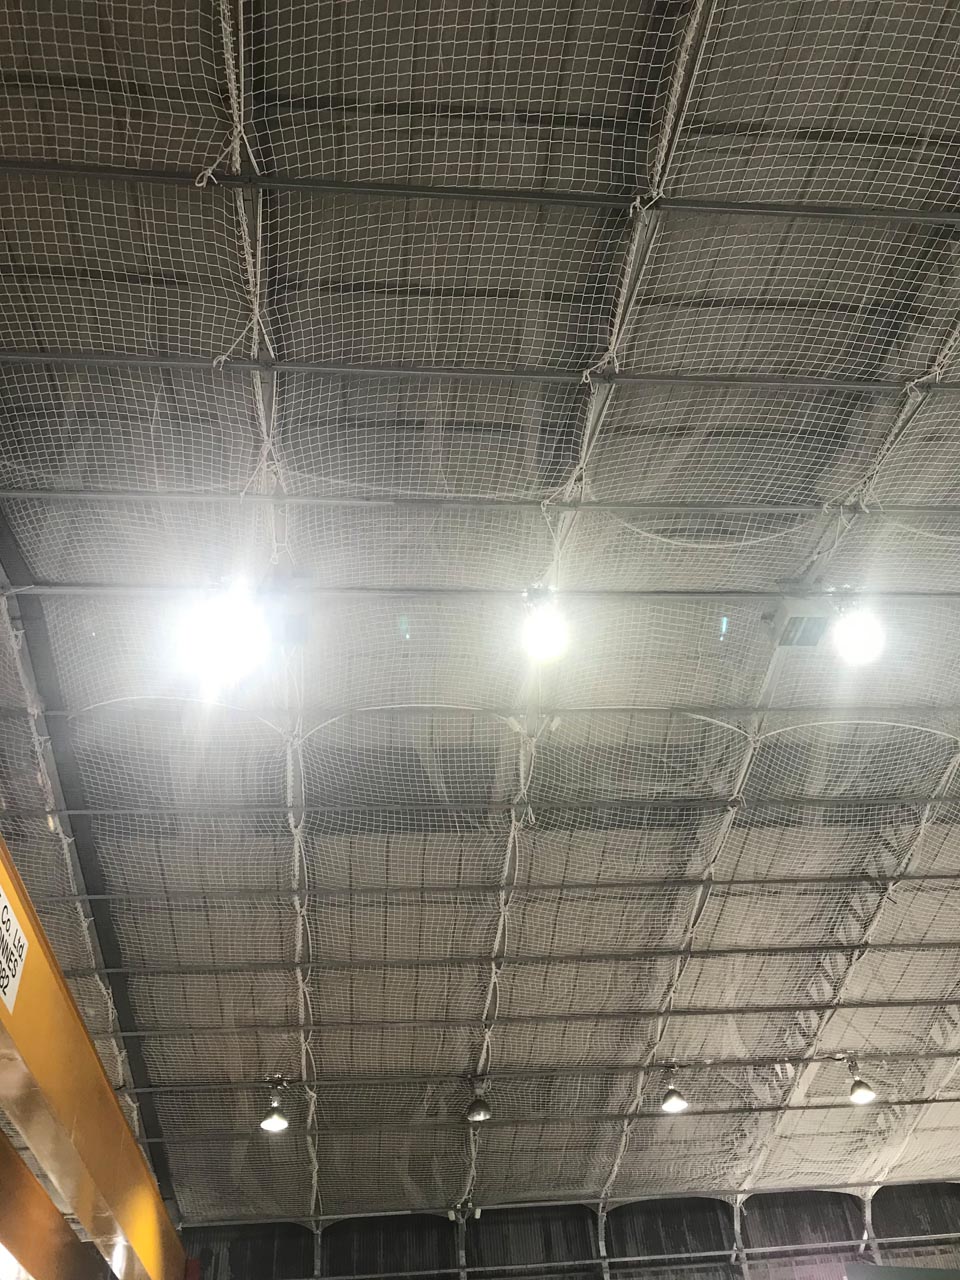 Safety netting under a roof inside a warehouse.